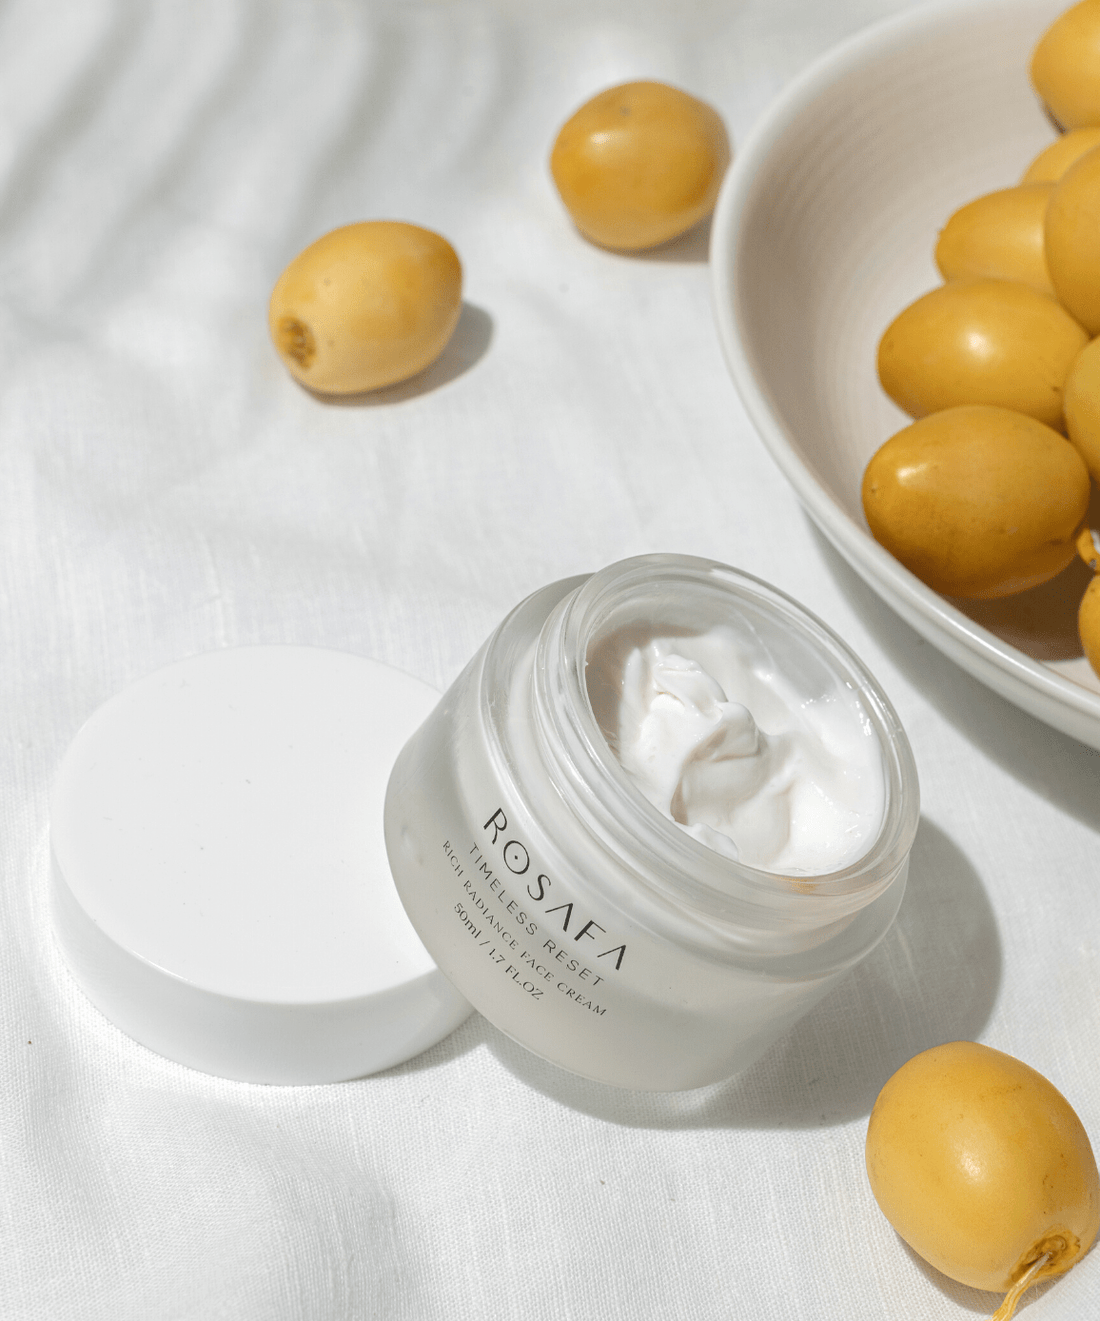 rosafa timeless reset face cream opened with dates in the background